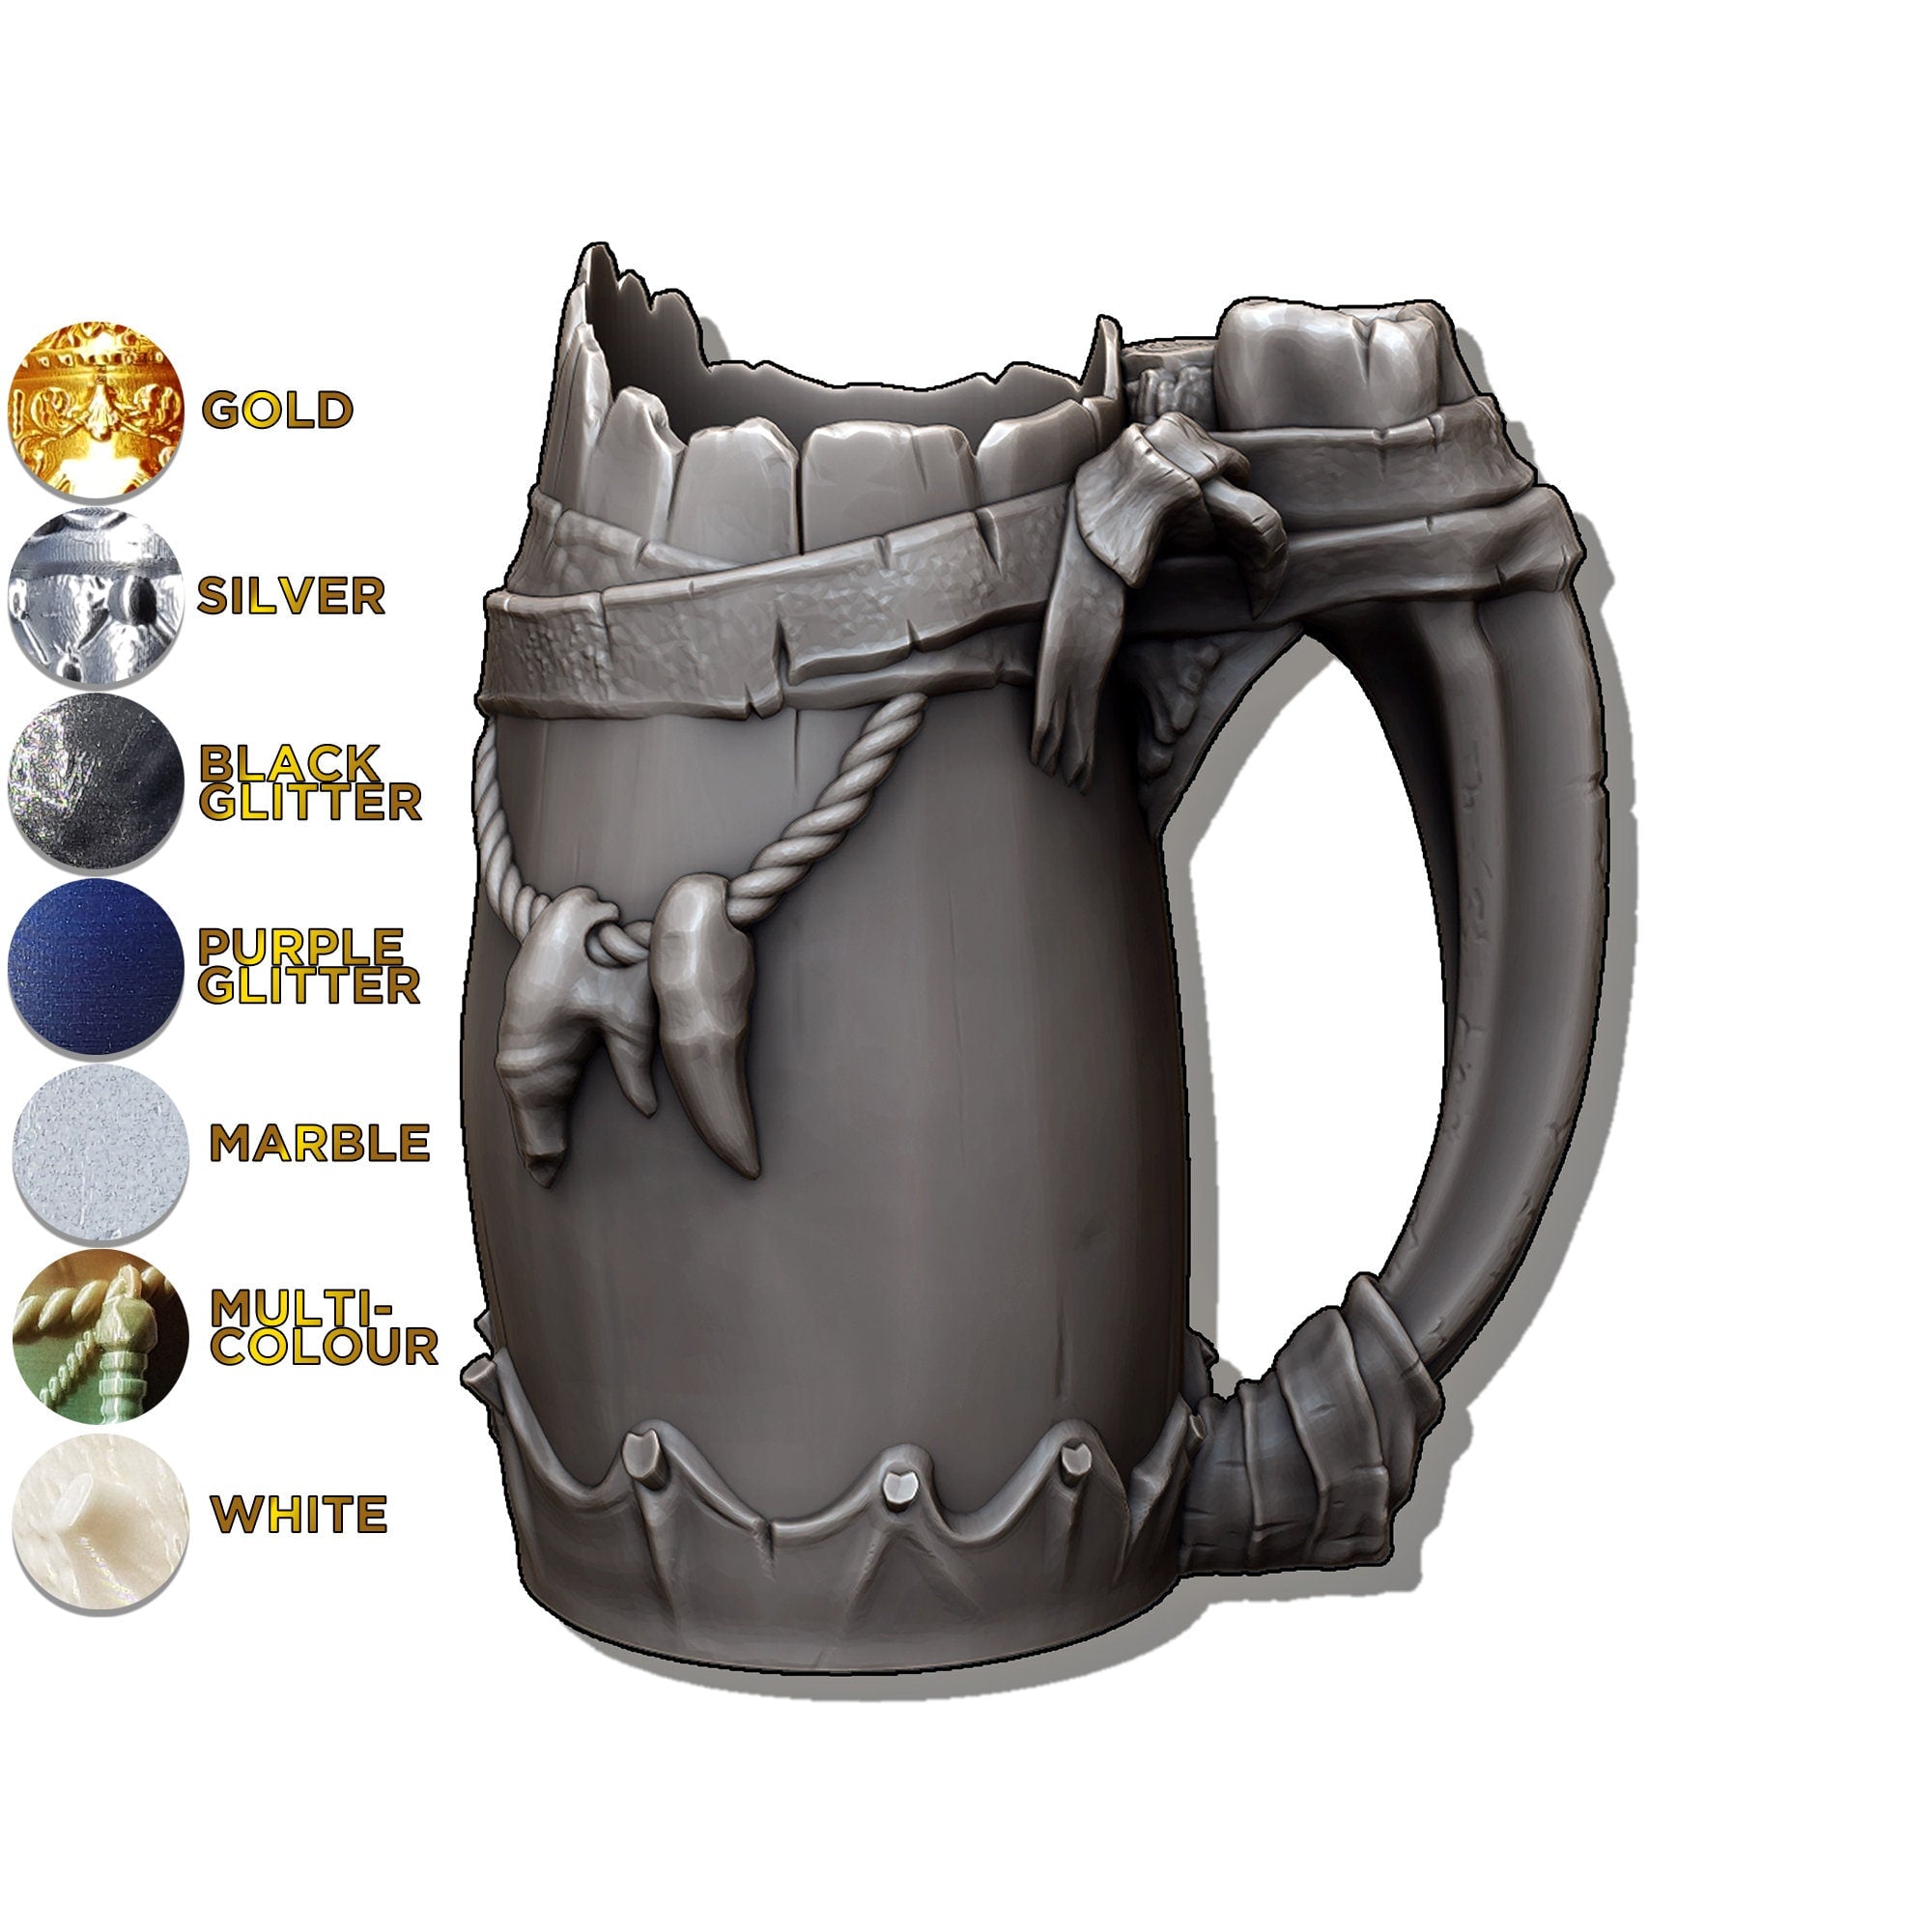 The BARBARIAN | Mythic Mug | Larp | Gaming Zubehör | Tabletop | Dice Cup | Box | Holder | Dungeons and Dragons | DnD | RPG | Fantasy-Role Playing Games